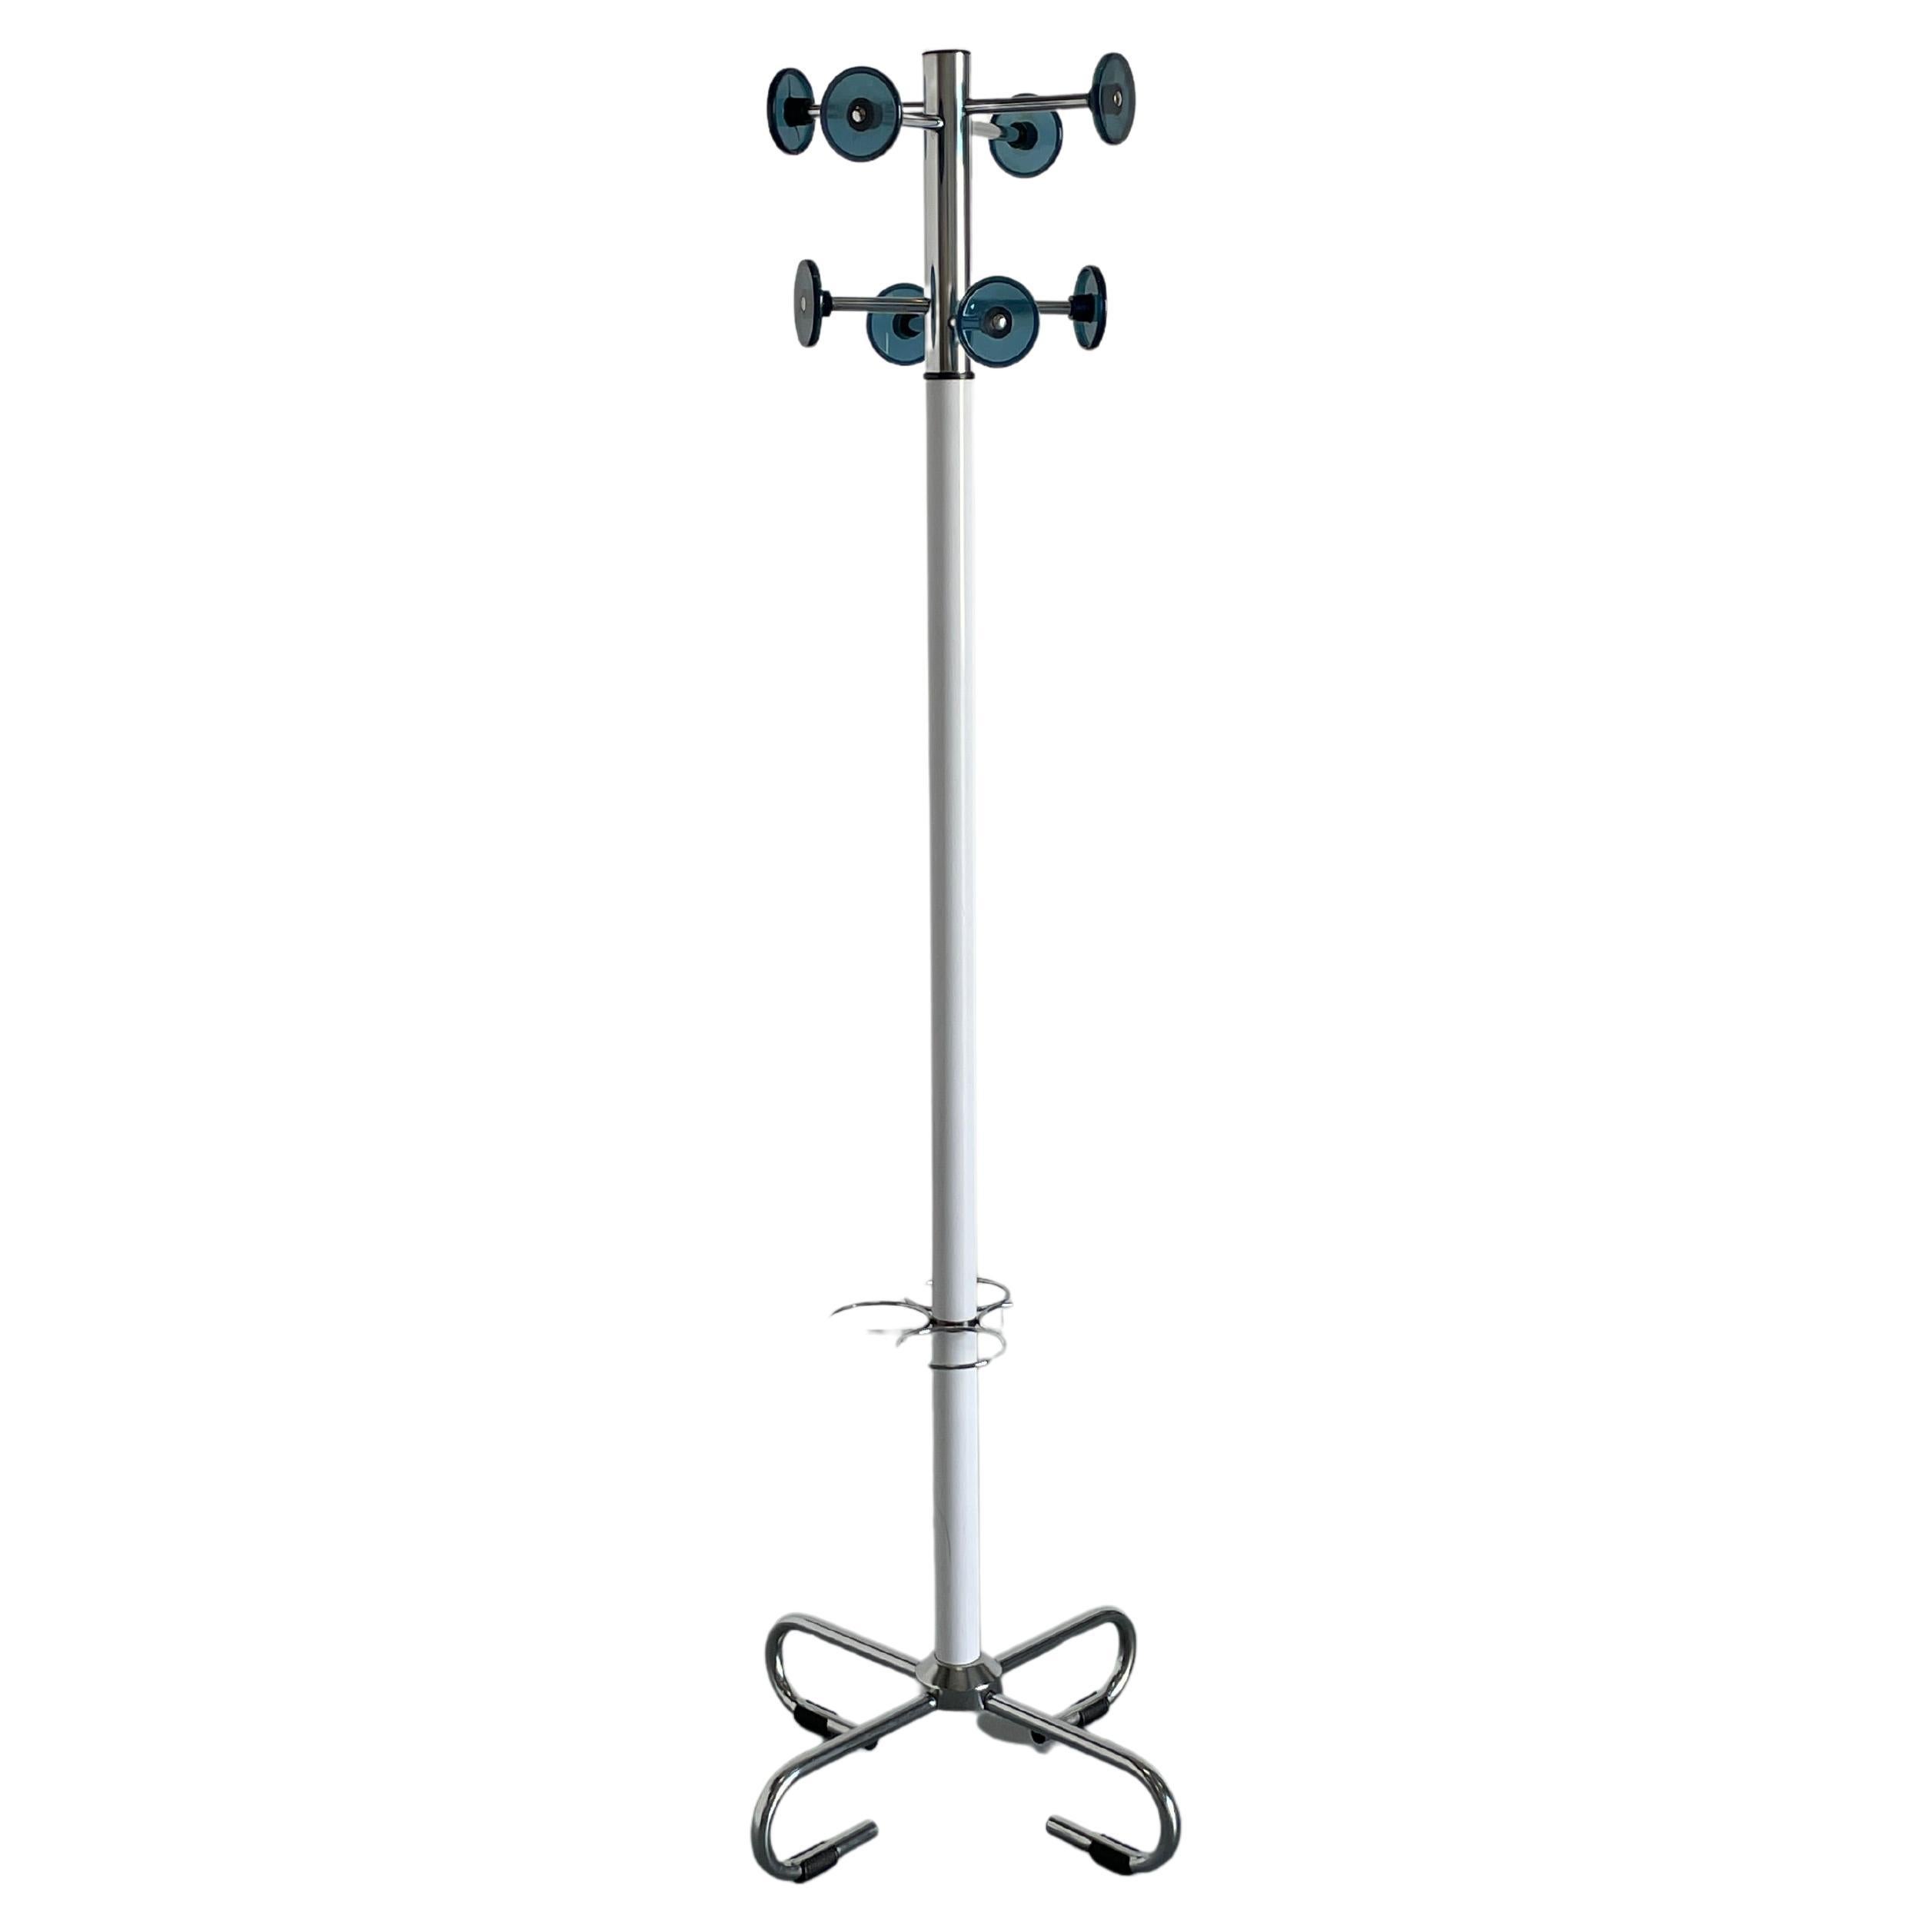 Striking space age vintage coat rack in white finish with chrome stand, umbrella station and hangers with dark blue plastic circular tops. Stemming from Italy, this coat rack would make a brilliant addition to your home (or spaceship).

Aside from a